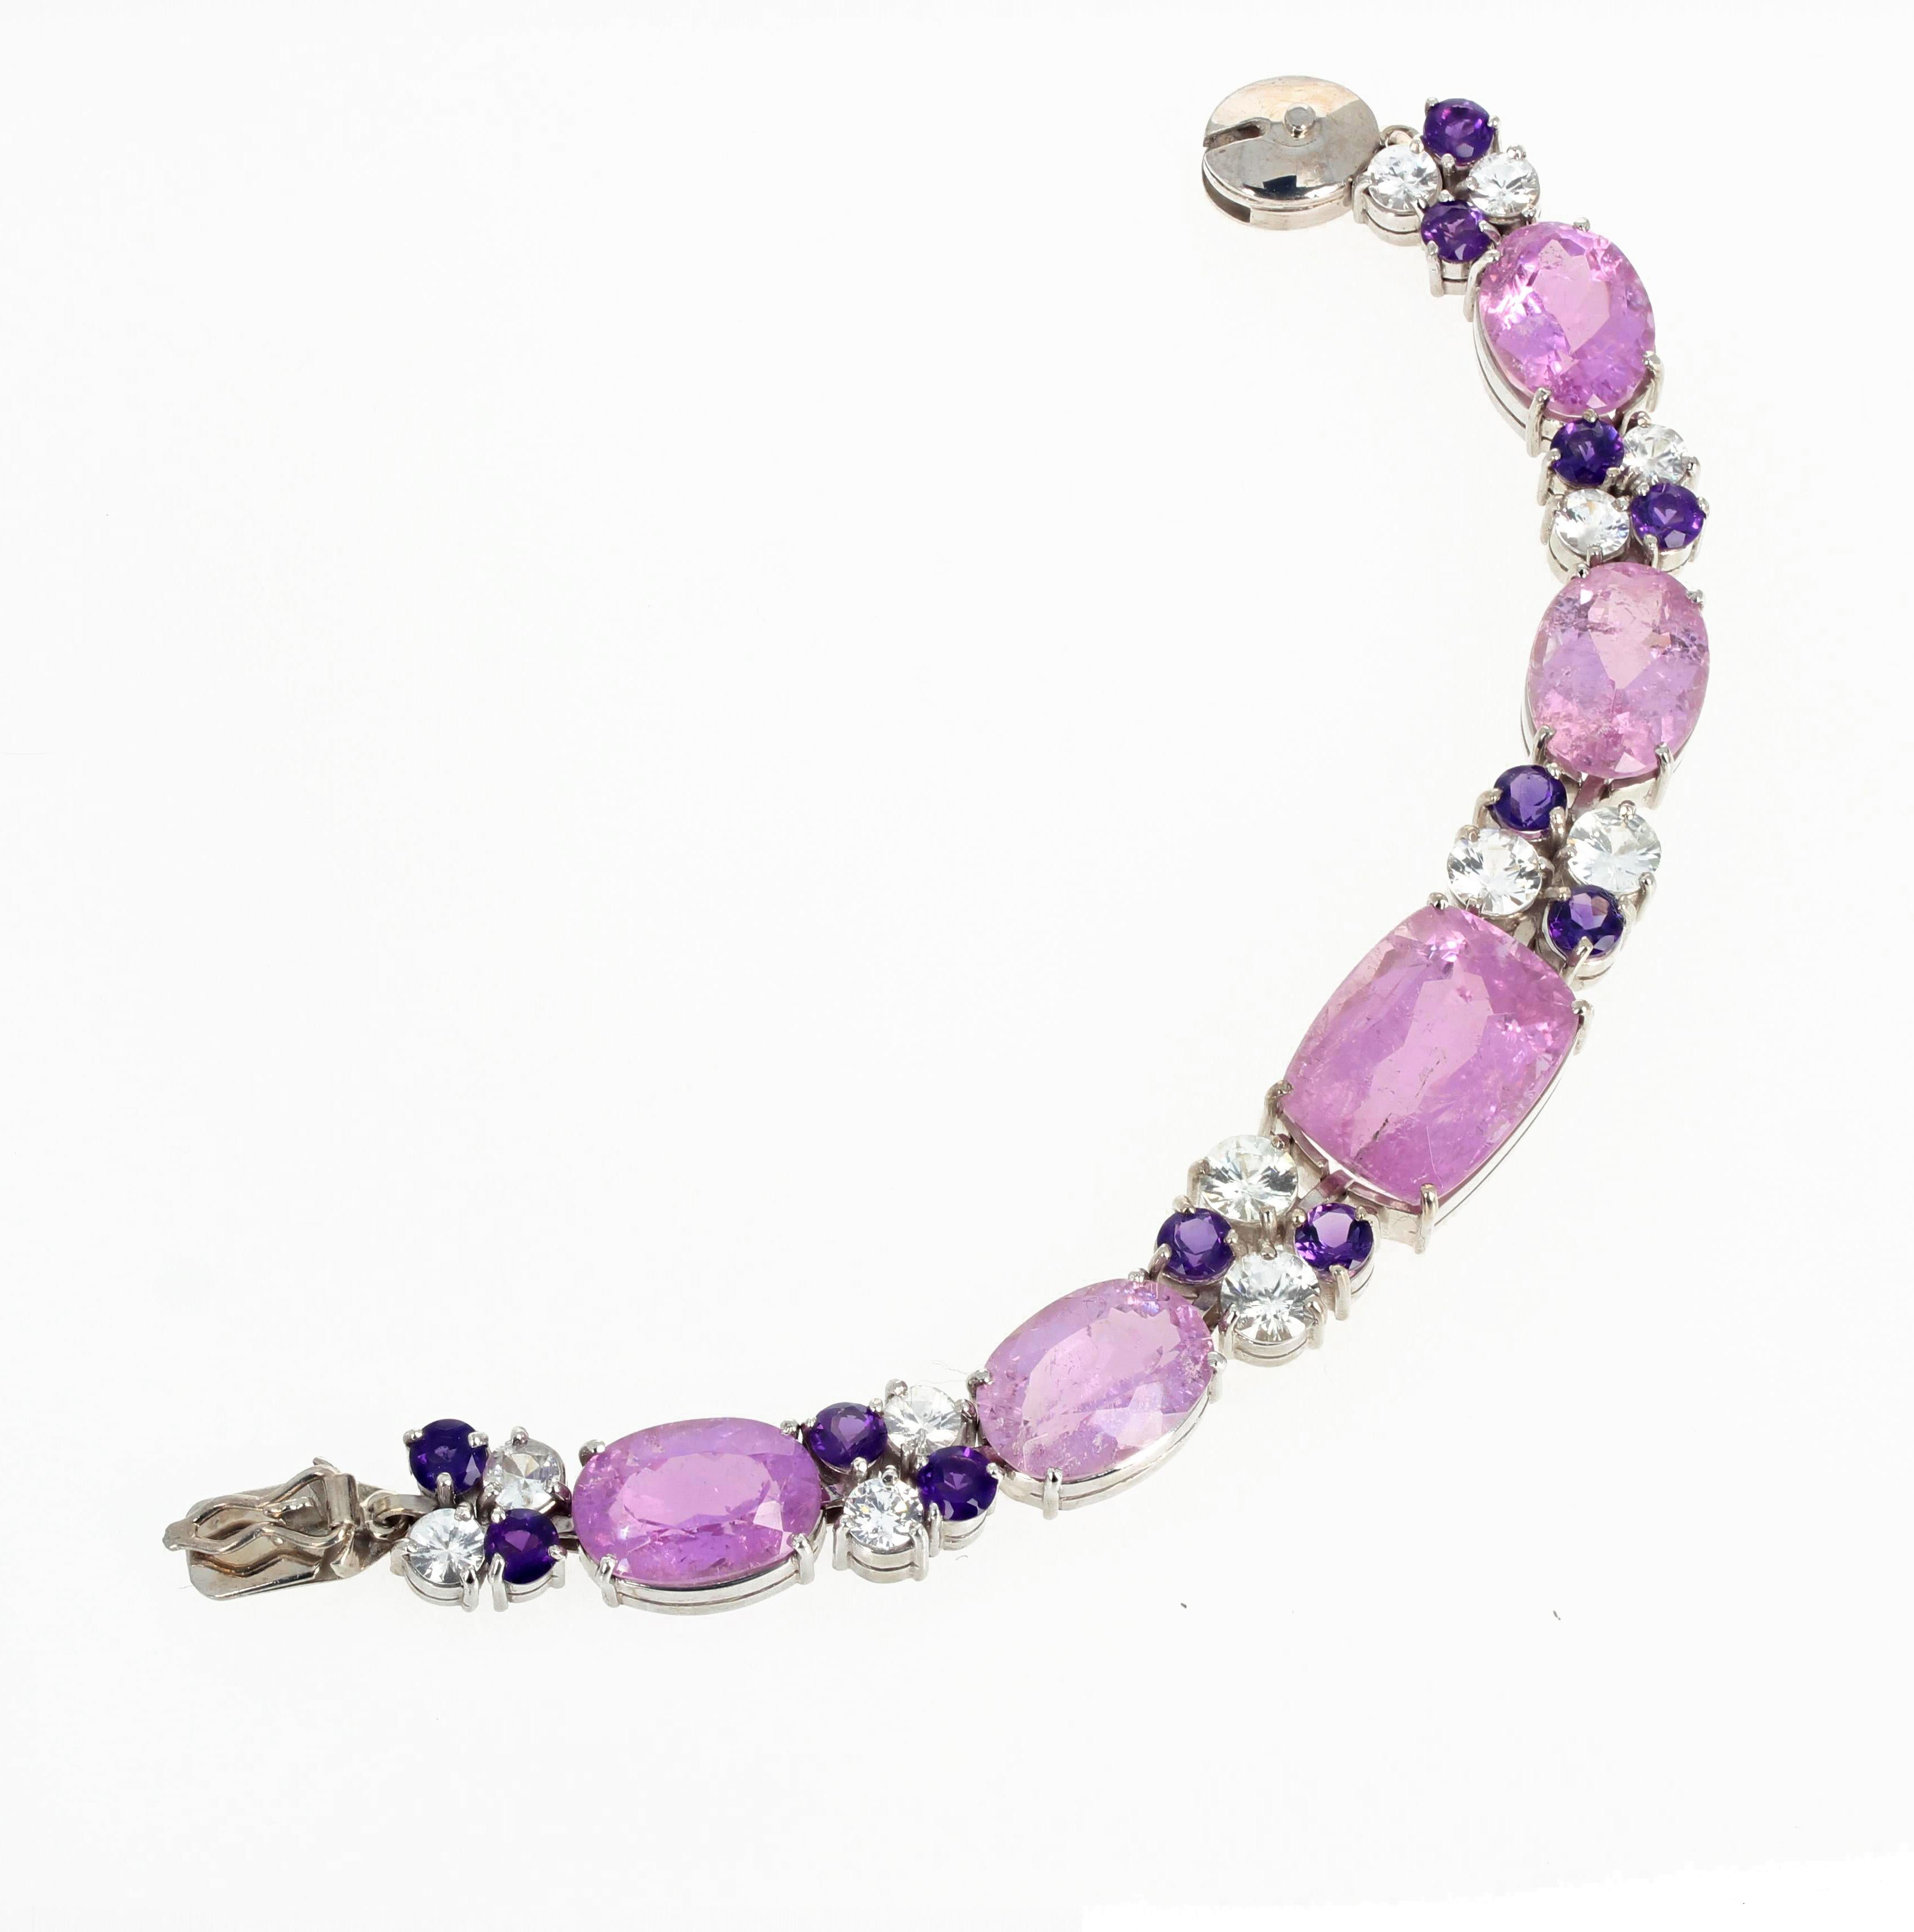 AJD Gorgeous Set of Kunzite, Amethyst, Topaz Silver Bracelet and Earrings In New Condition For Sale In Raleigh, NC